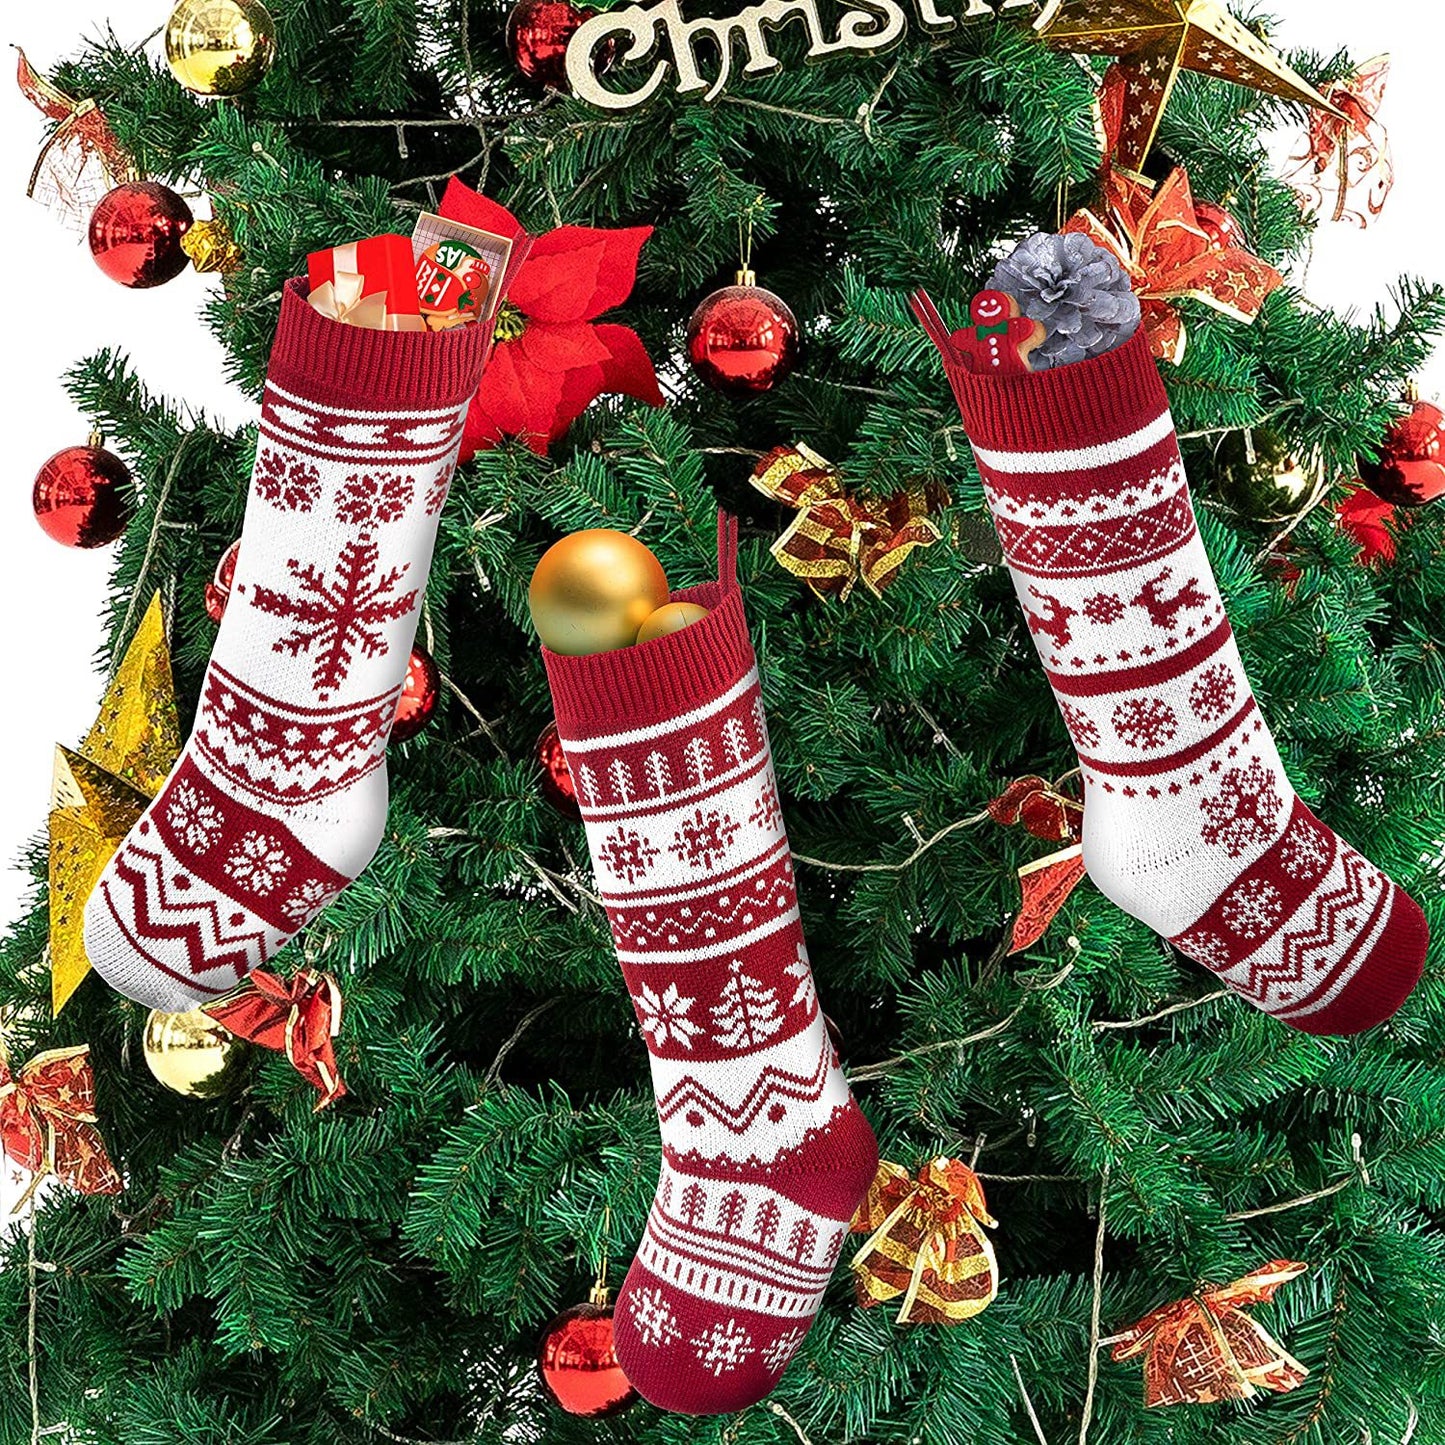 2023 Christmas Decoration - Knitted Stockings and Gift Bags, Large Size, Hanging Ornaments